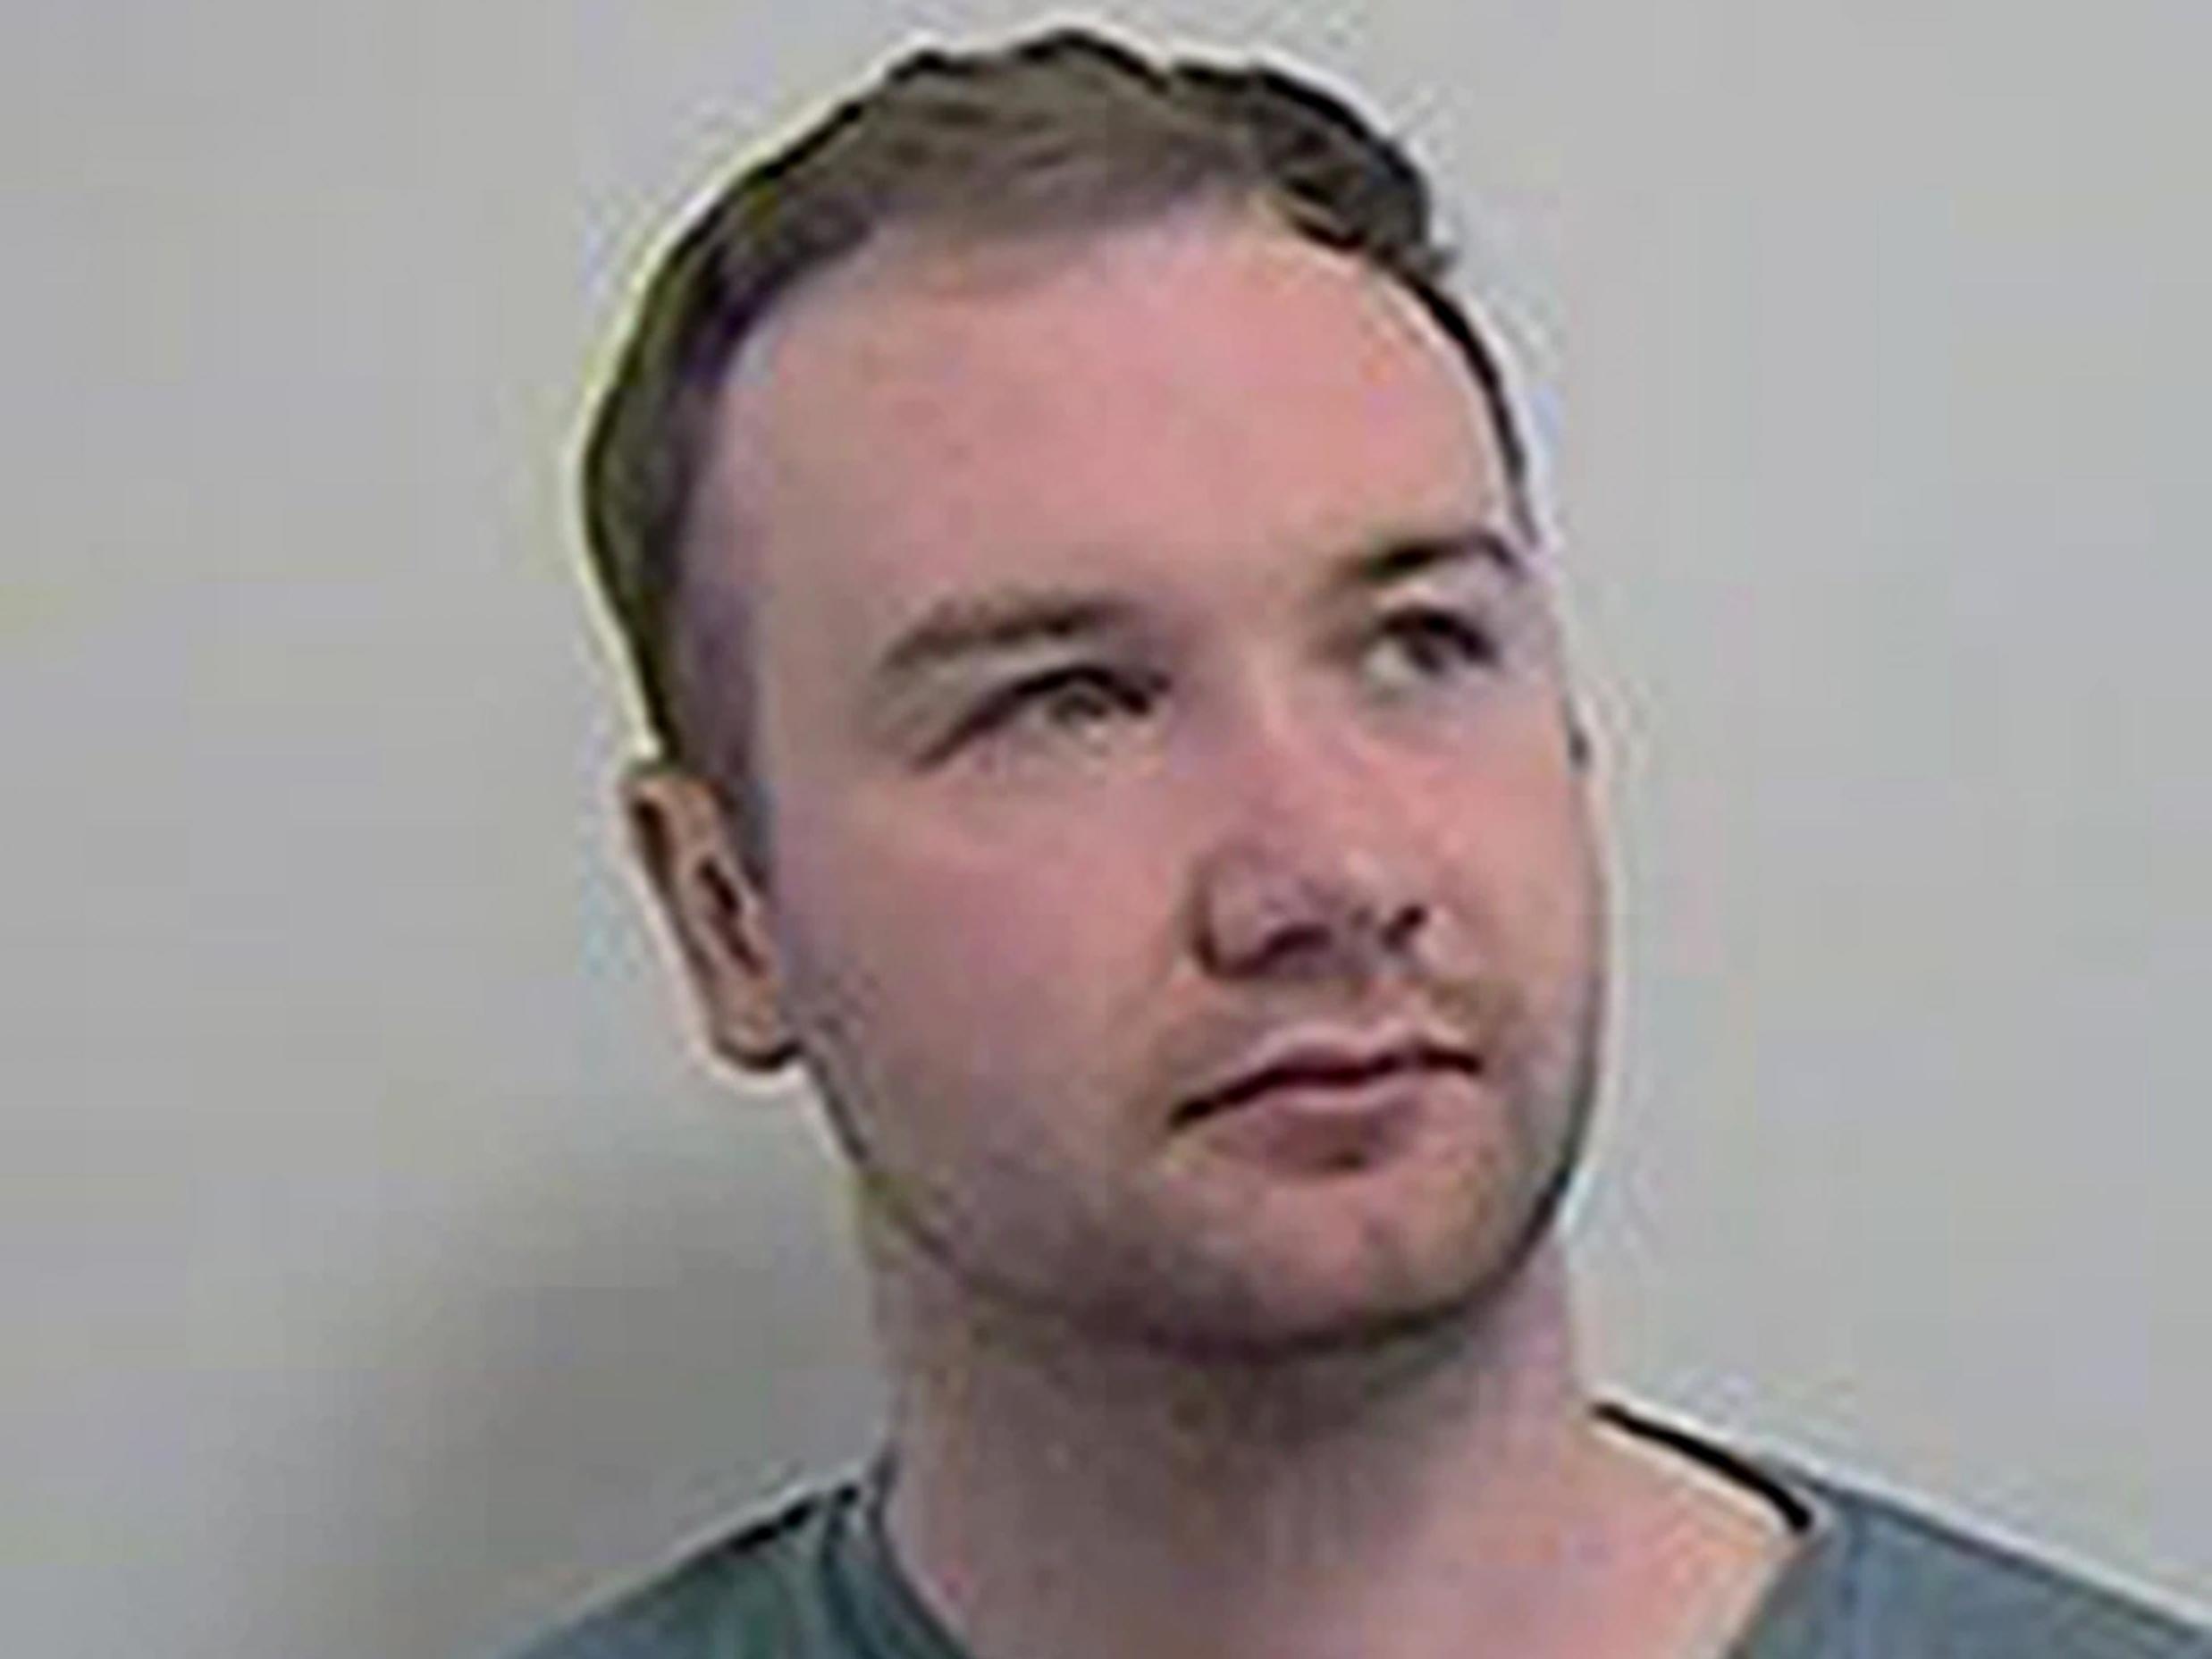 Darren Barr has been jailed for 25 months after he stole and sold on thousands of books from universities